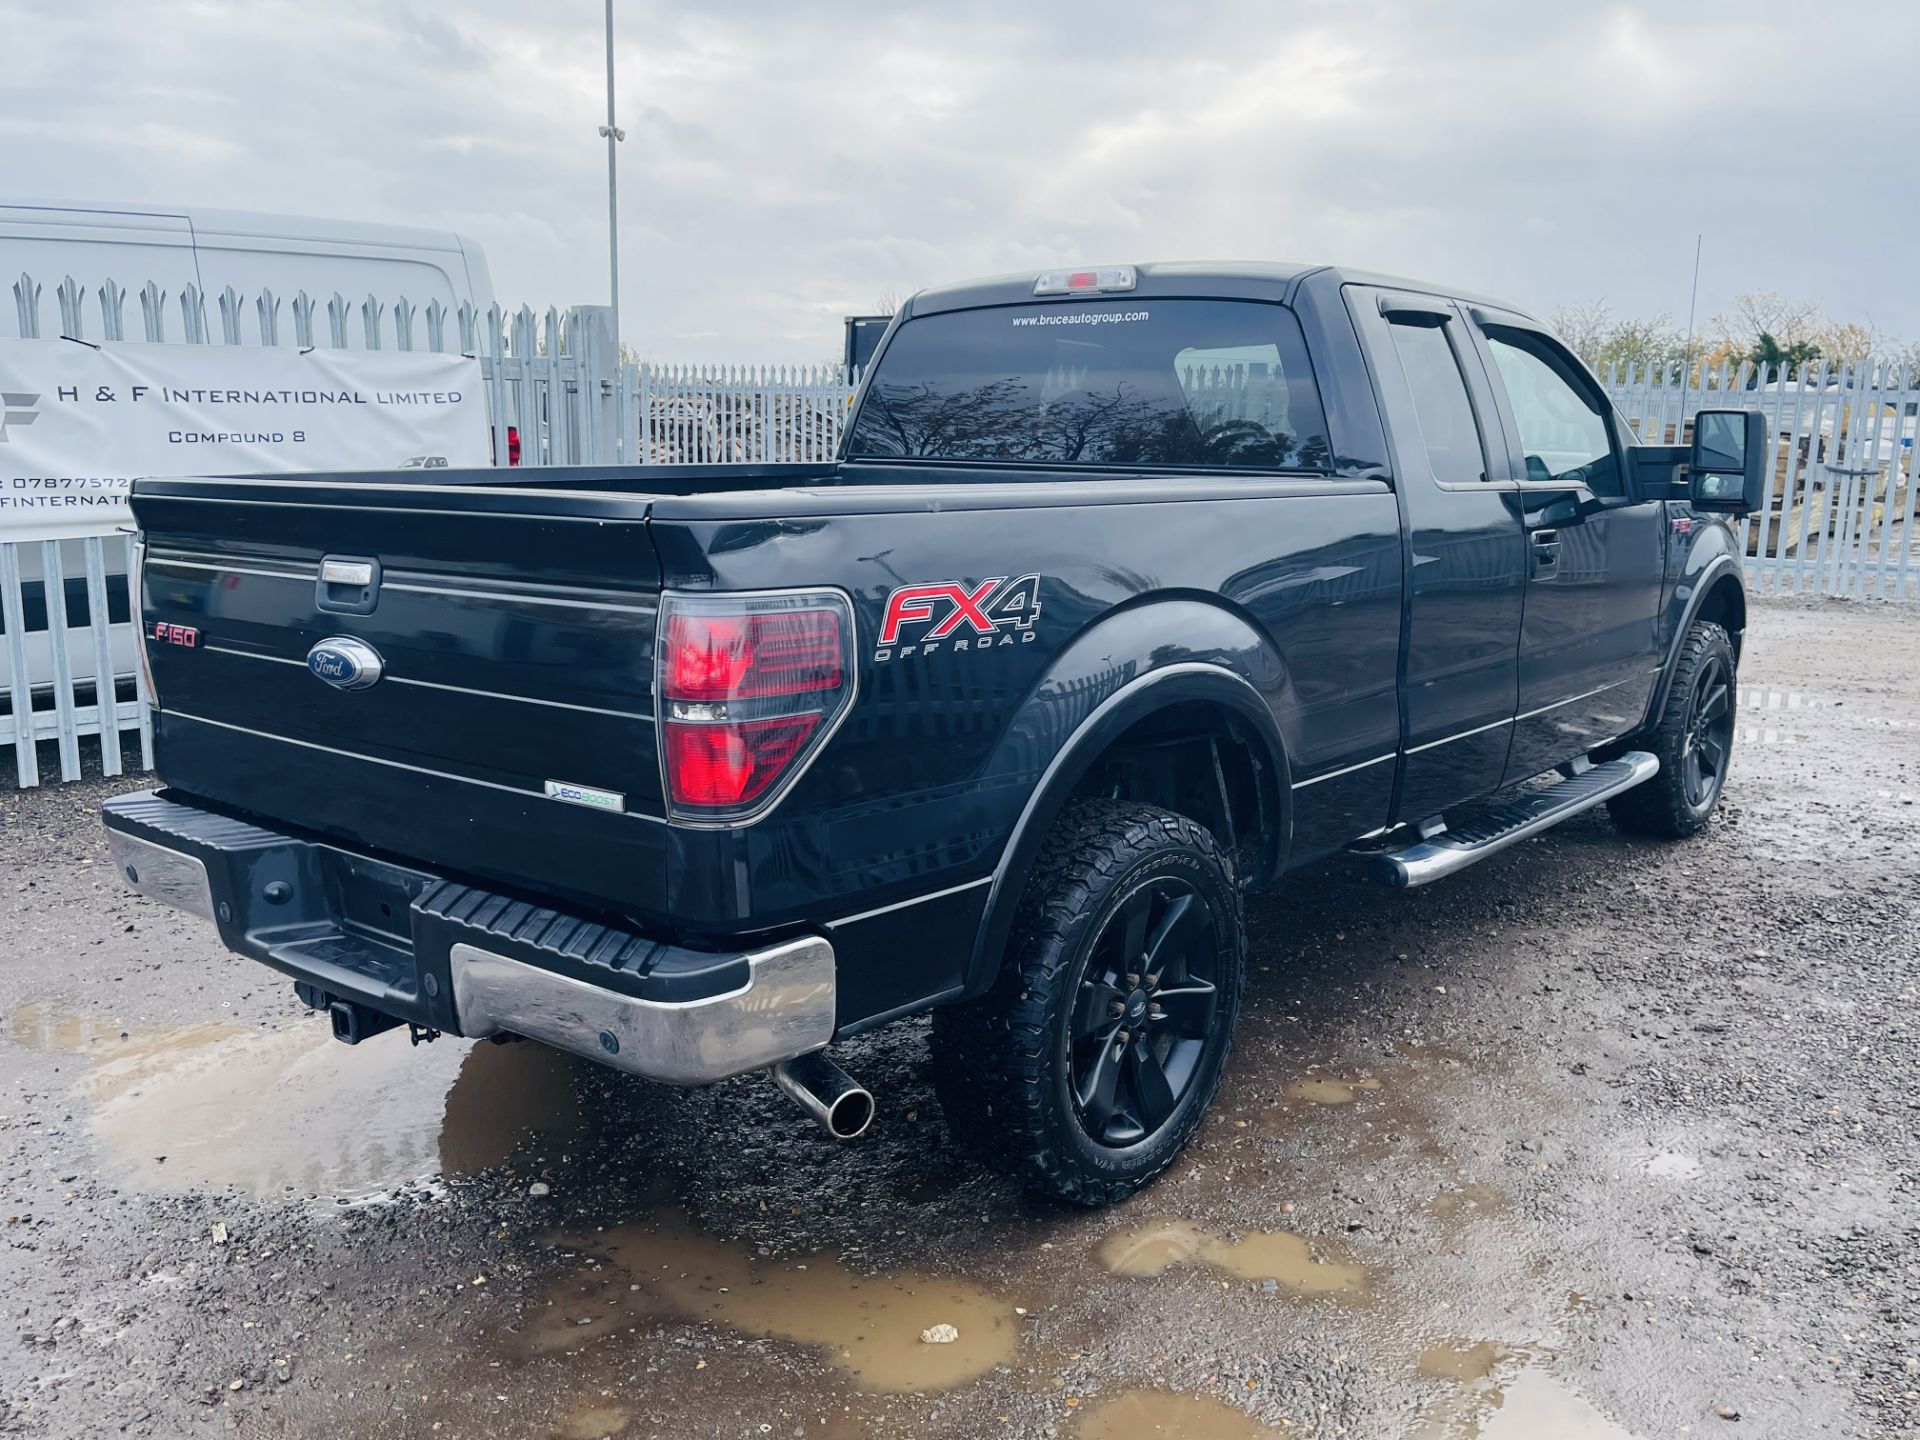 ** ON SALE ** Ford F-150 3.5L V6 SuperCab 4WD FX4 Edition '2012 Year' Colour Coded Package - FX4 - Image 10 of 32